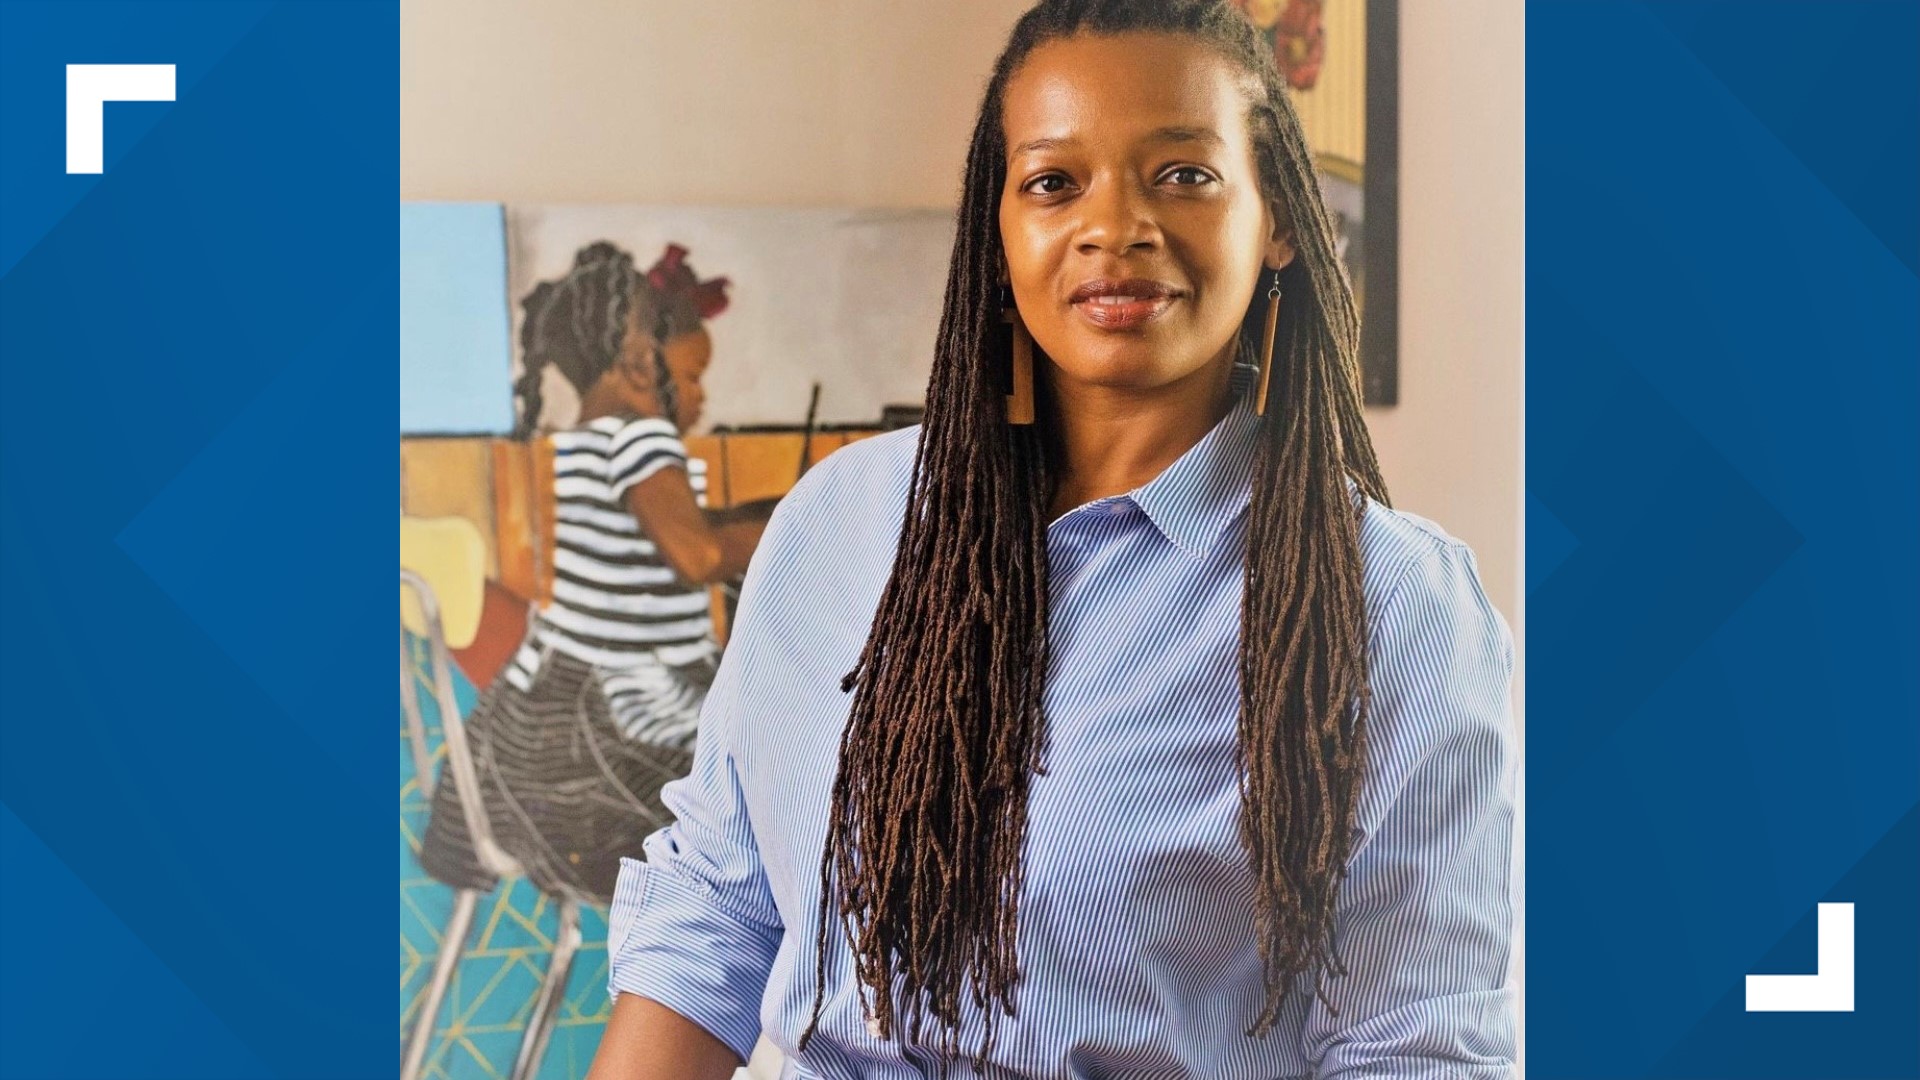 Ayana Ross from Houston County is a finalist for the largest painting prize ever awarded solely to women artists